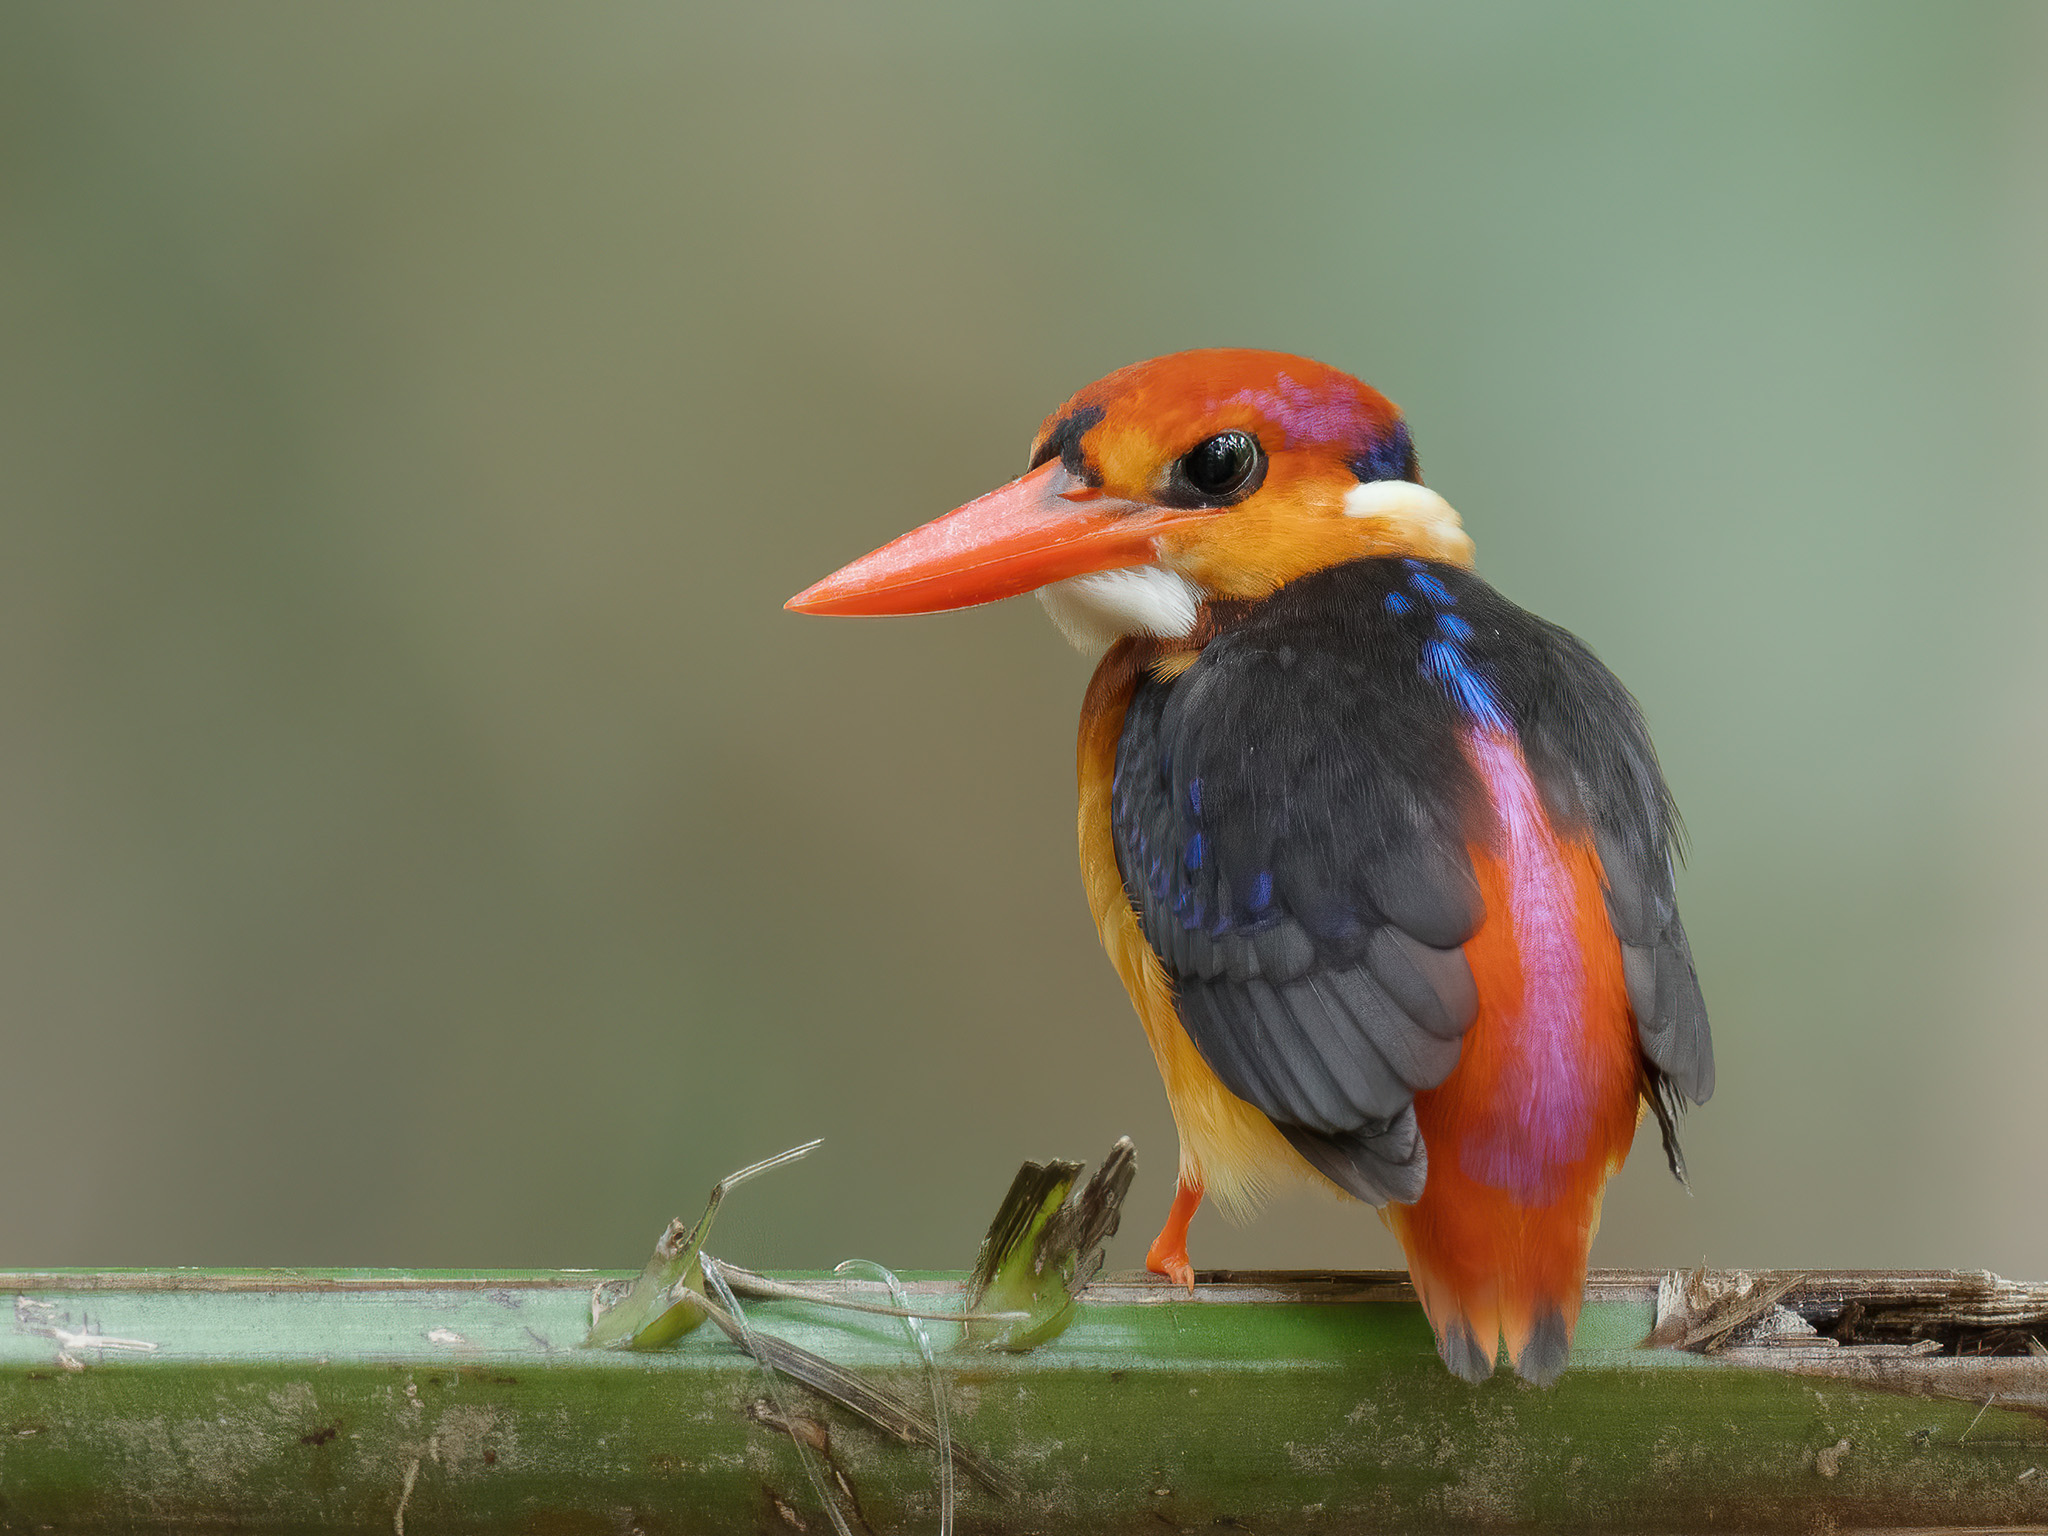 Oriental Dwarf Kingfisher at Windsor Nature Park on 31 Oct 2022. Photo credit: Francis Yap